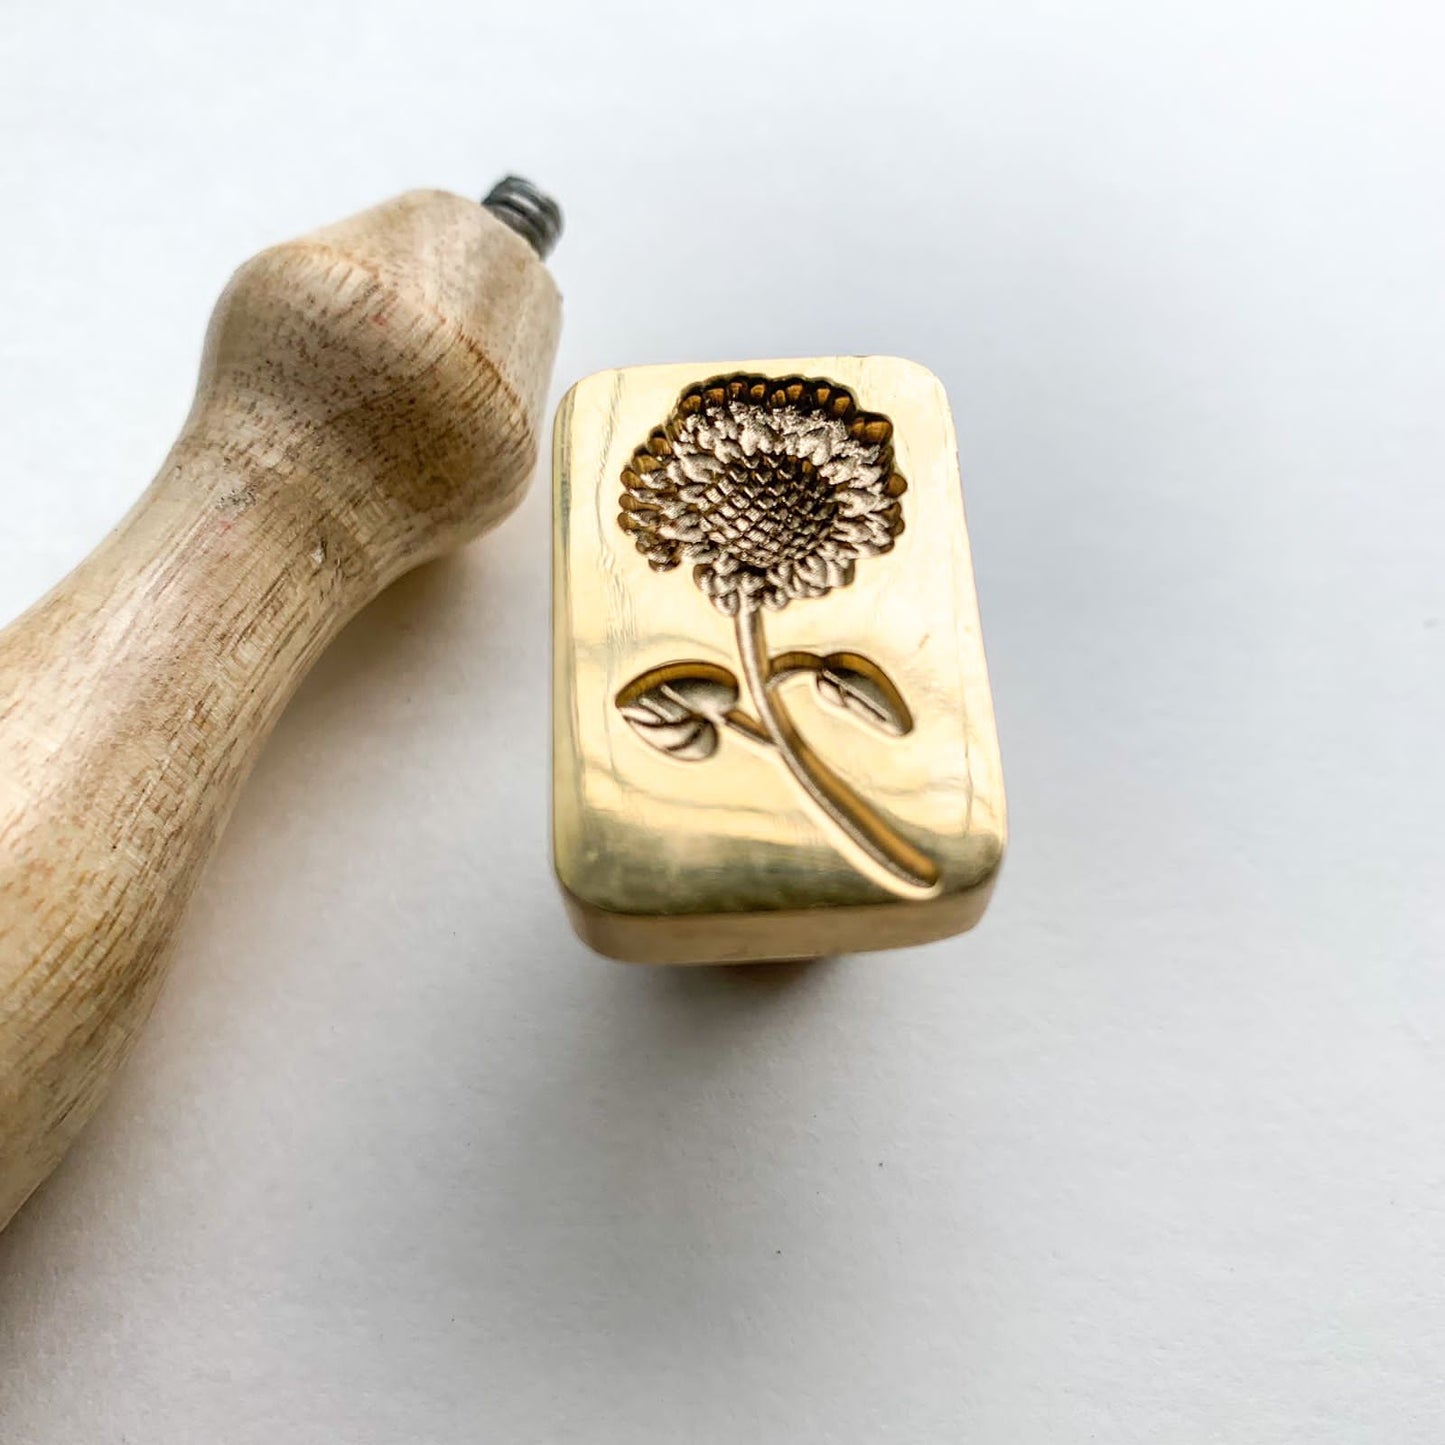 AW79 - 18B - Premium 3D Seal Wax Stamp with Wooden Handle | 30mm Diameter